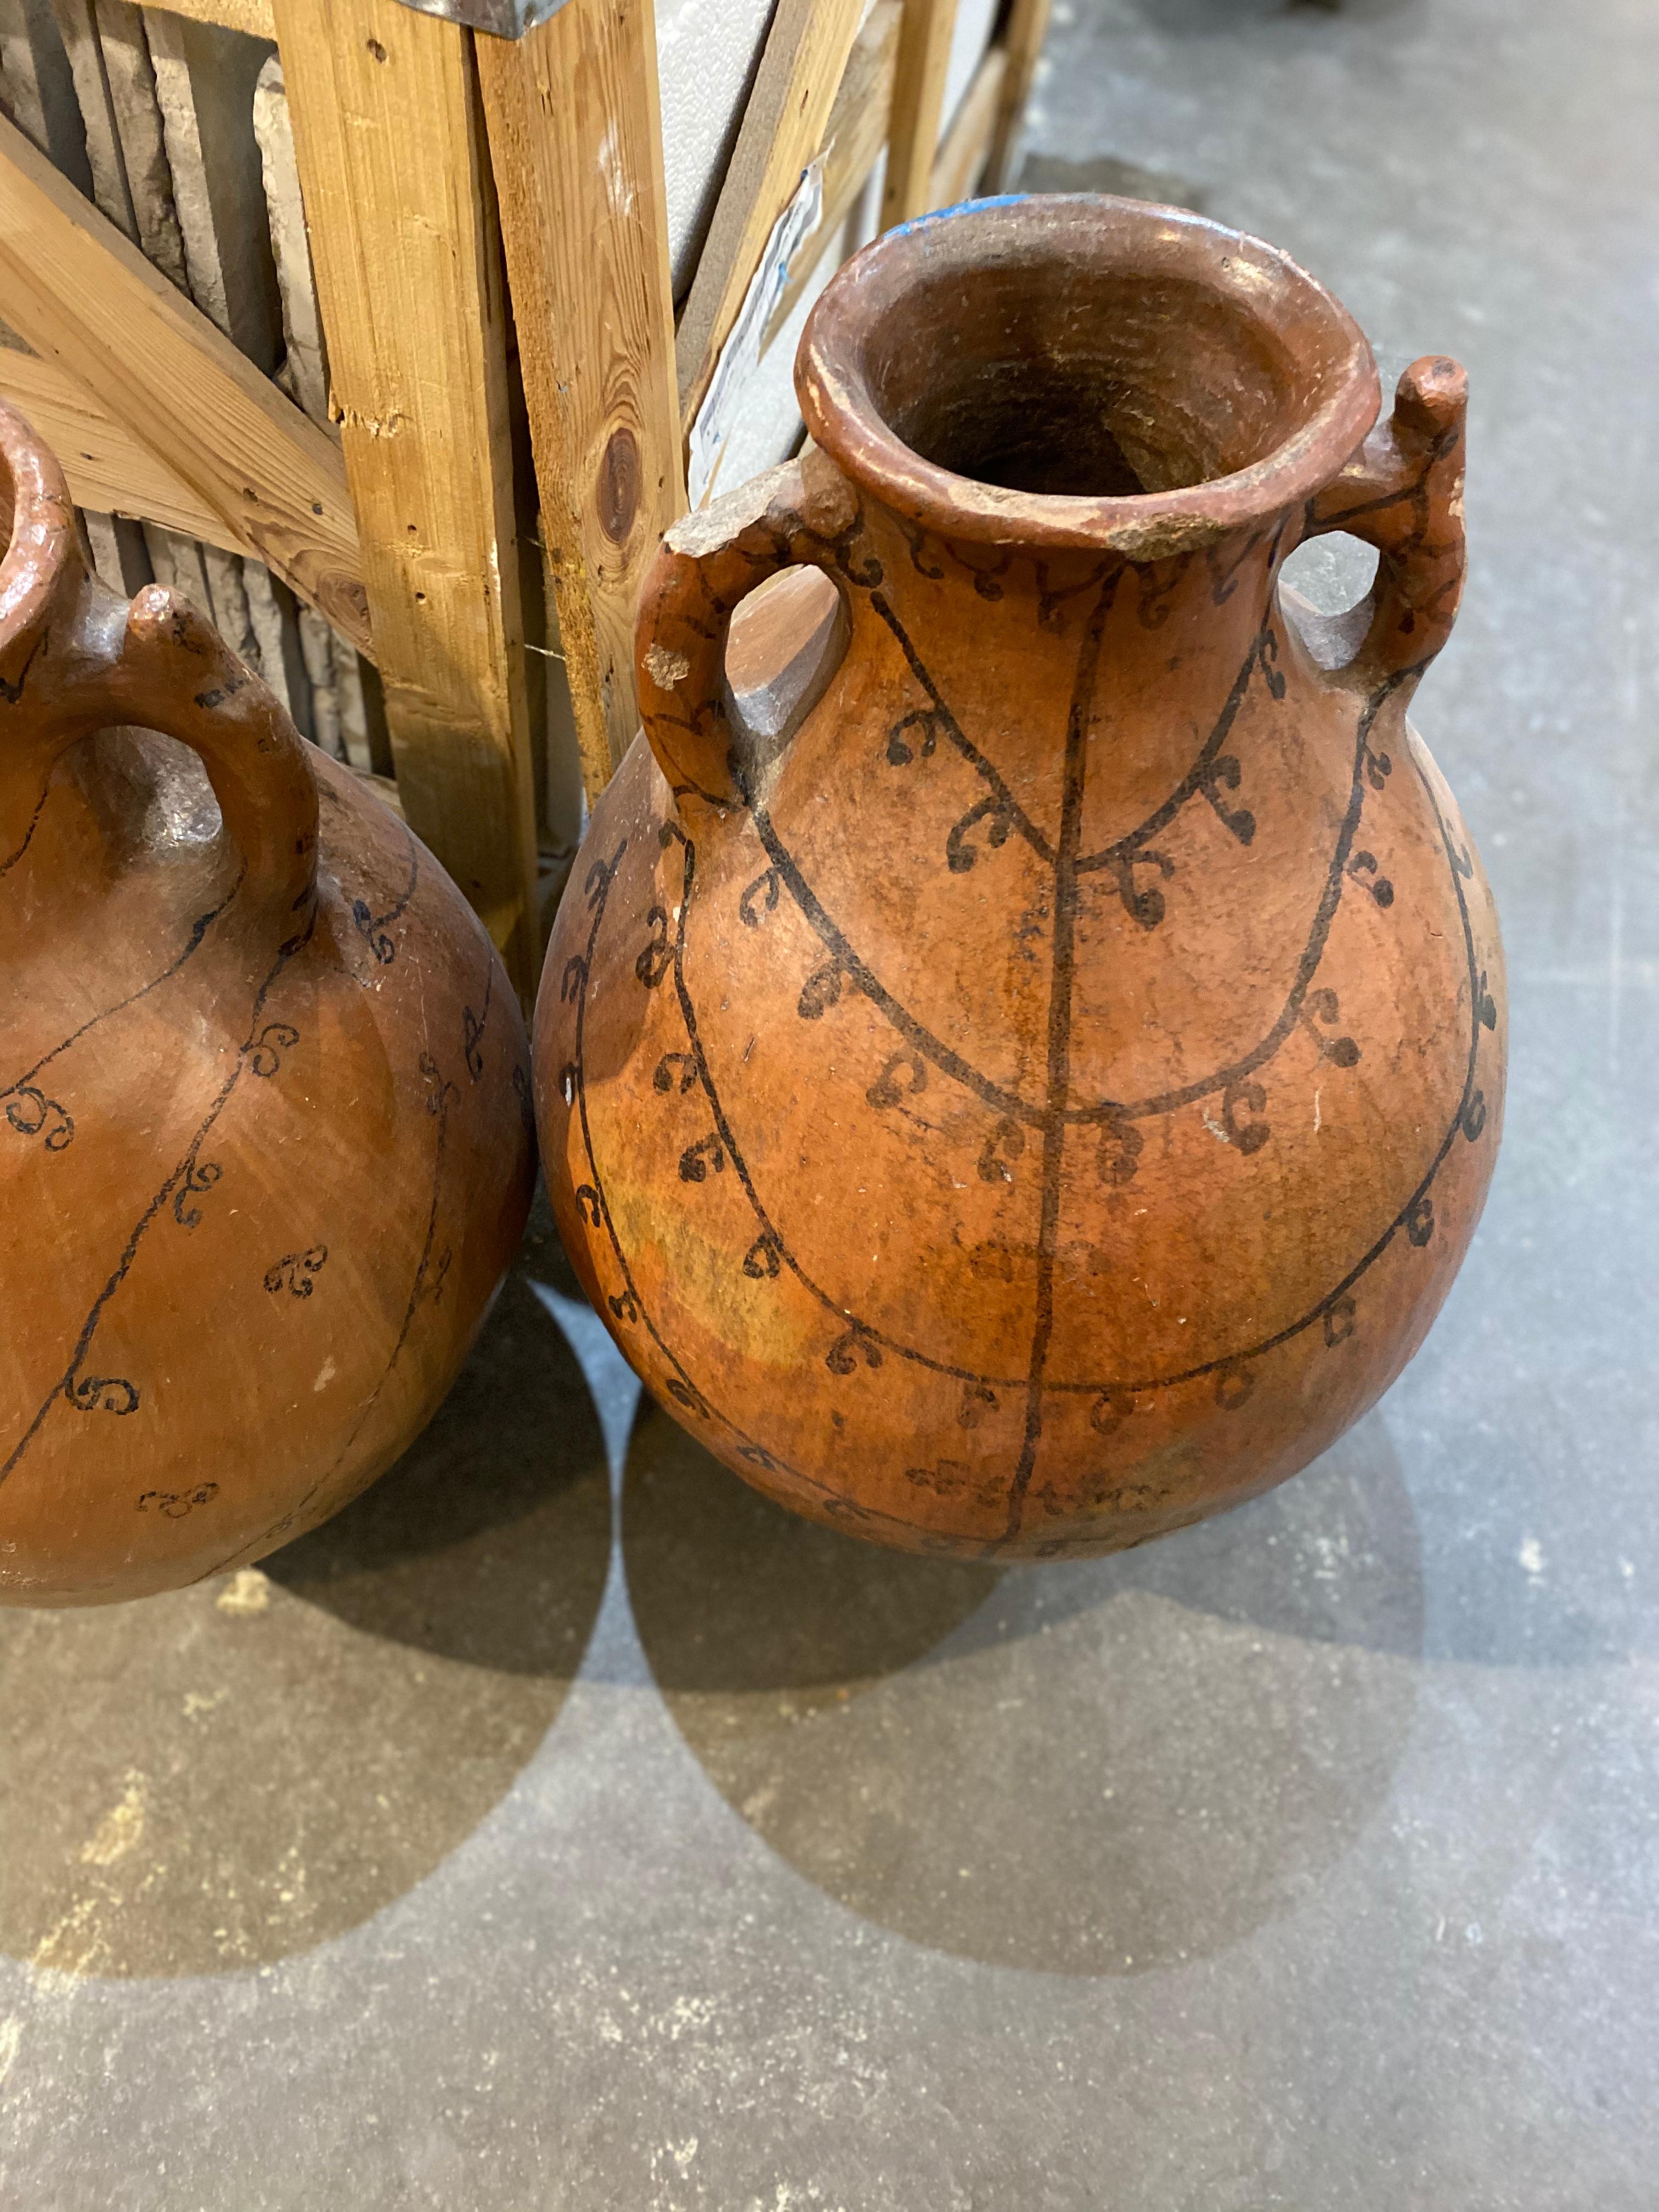 Clay 19th Century Grain Vessels from Spain